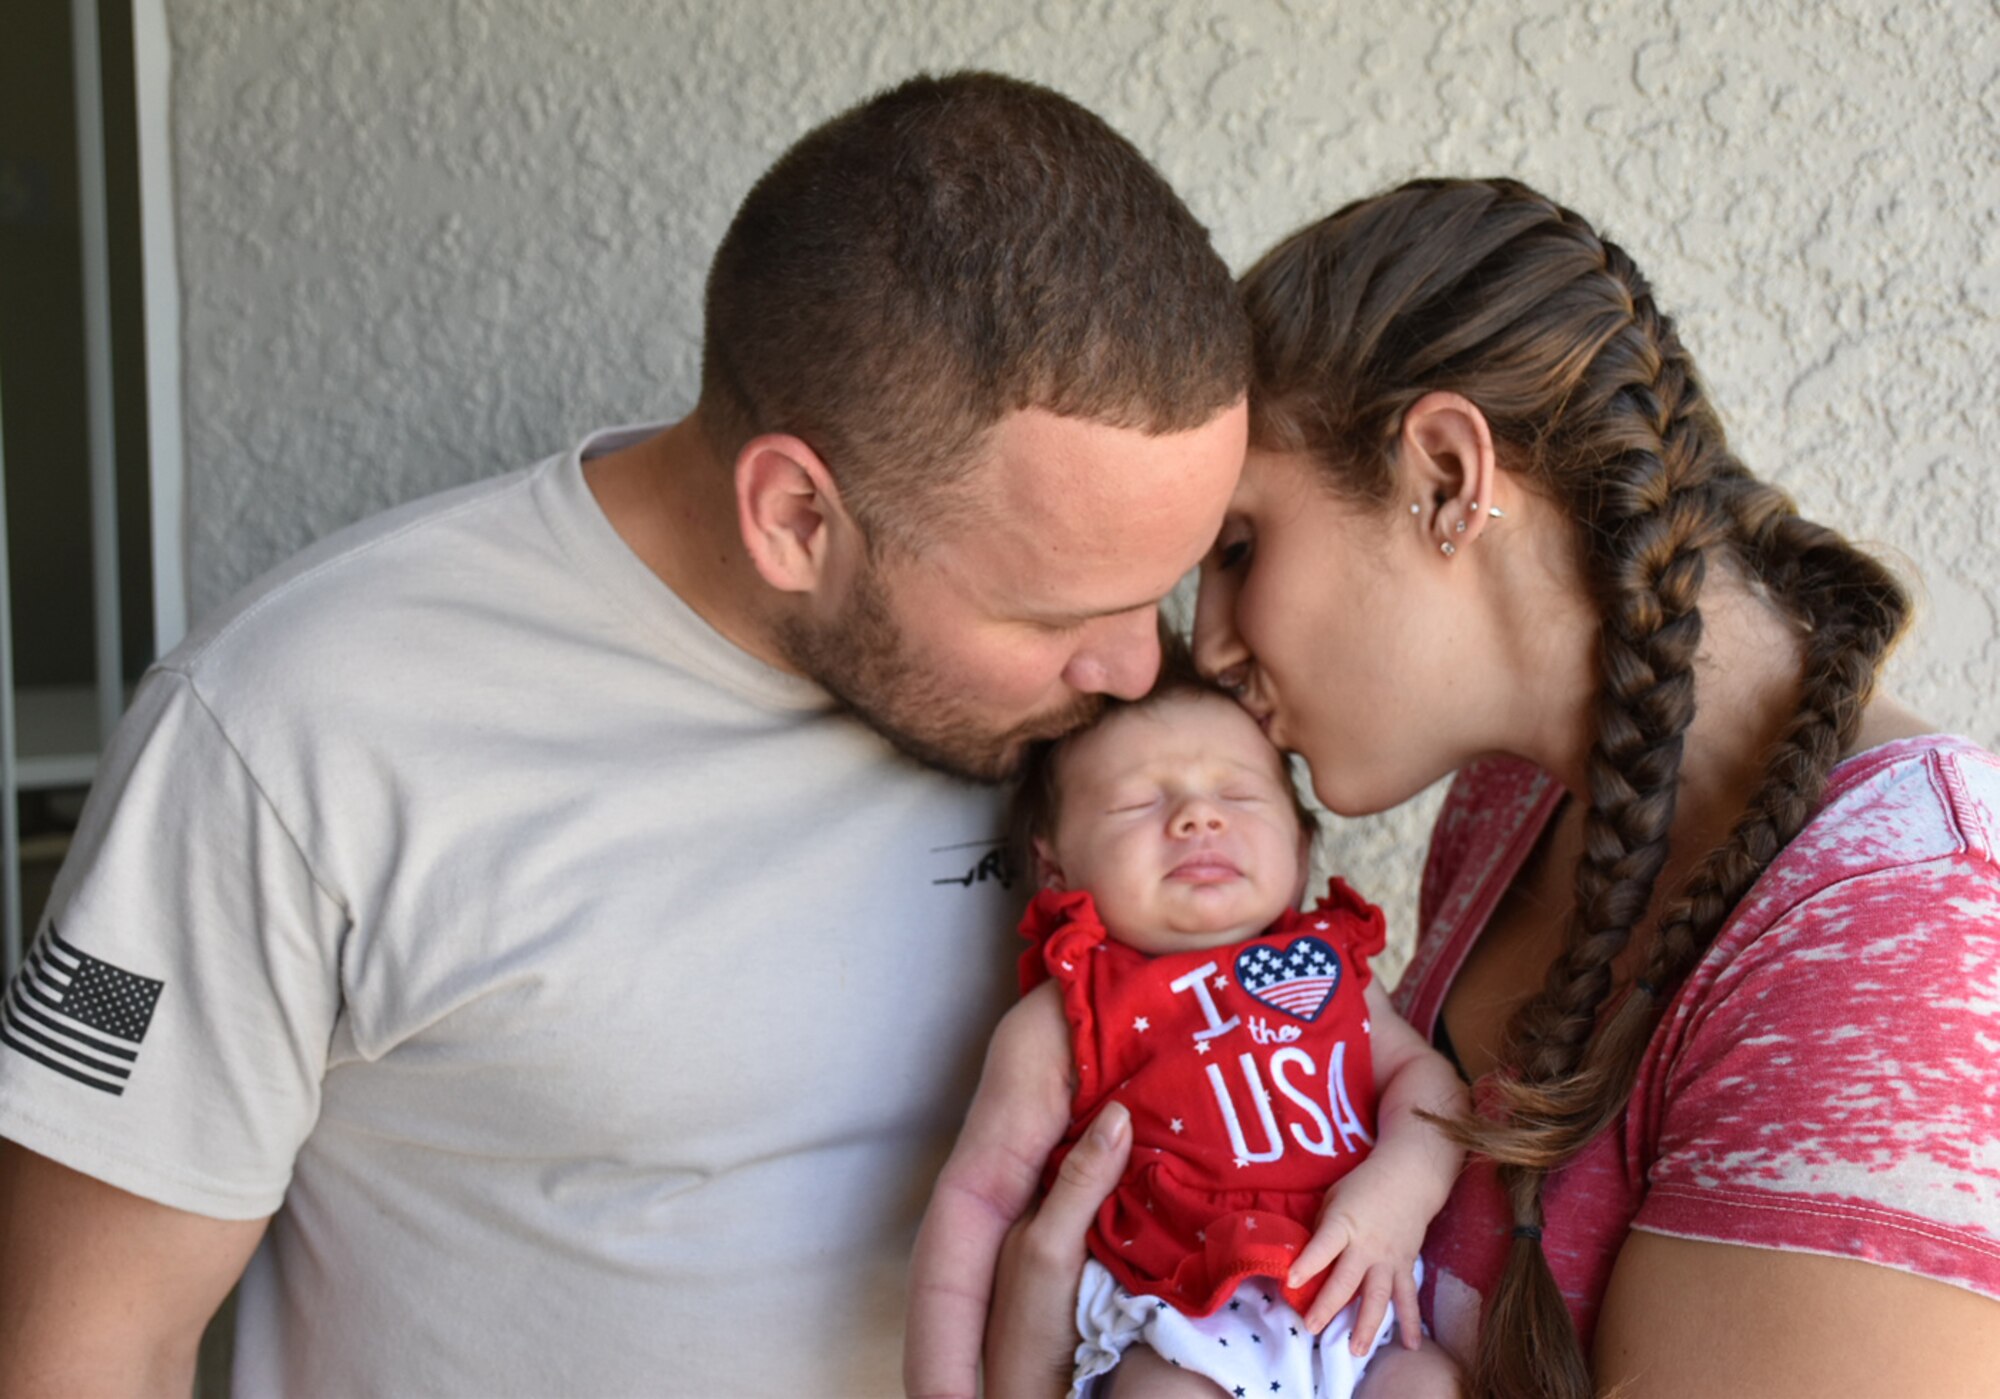 Staff Sgt. Jeff A. Parrish Jr., left, 920th Aircraft Maintenance Squadron aircraft armament systems technician, and his wife, Jacquelyne Parrish, kiss their daughter Raelynn Noelle Parrish, July 4, 2017, outside of their home in Ocoee, Florida. Jeff returned home shortly before the early birth of their first child after a four-month deployment to Afghanistan. (Courtesy photo) 